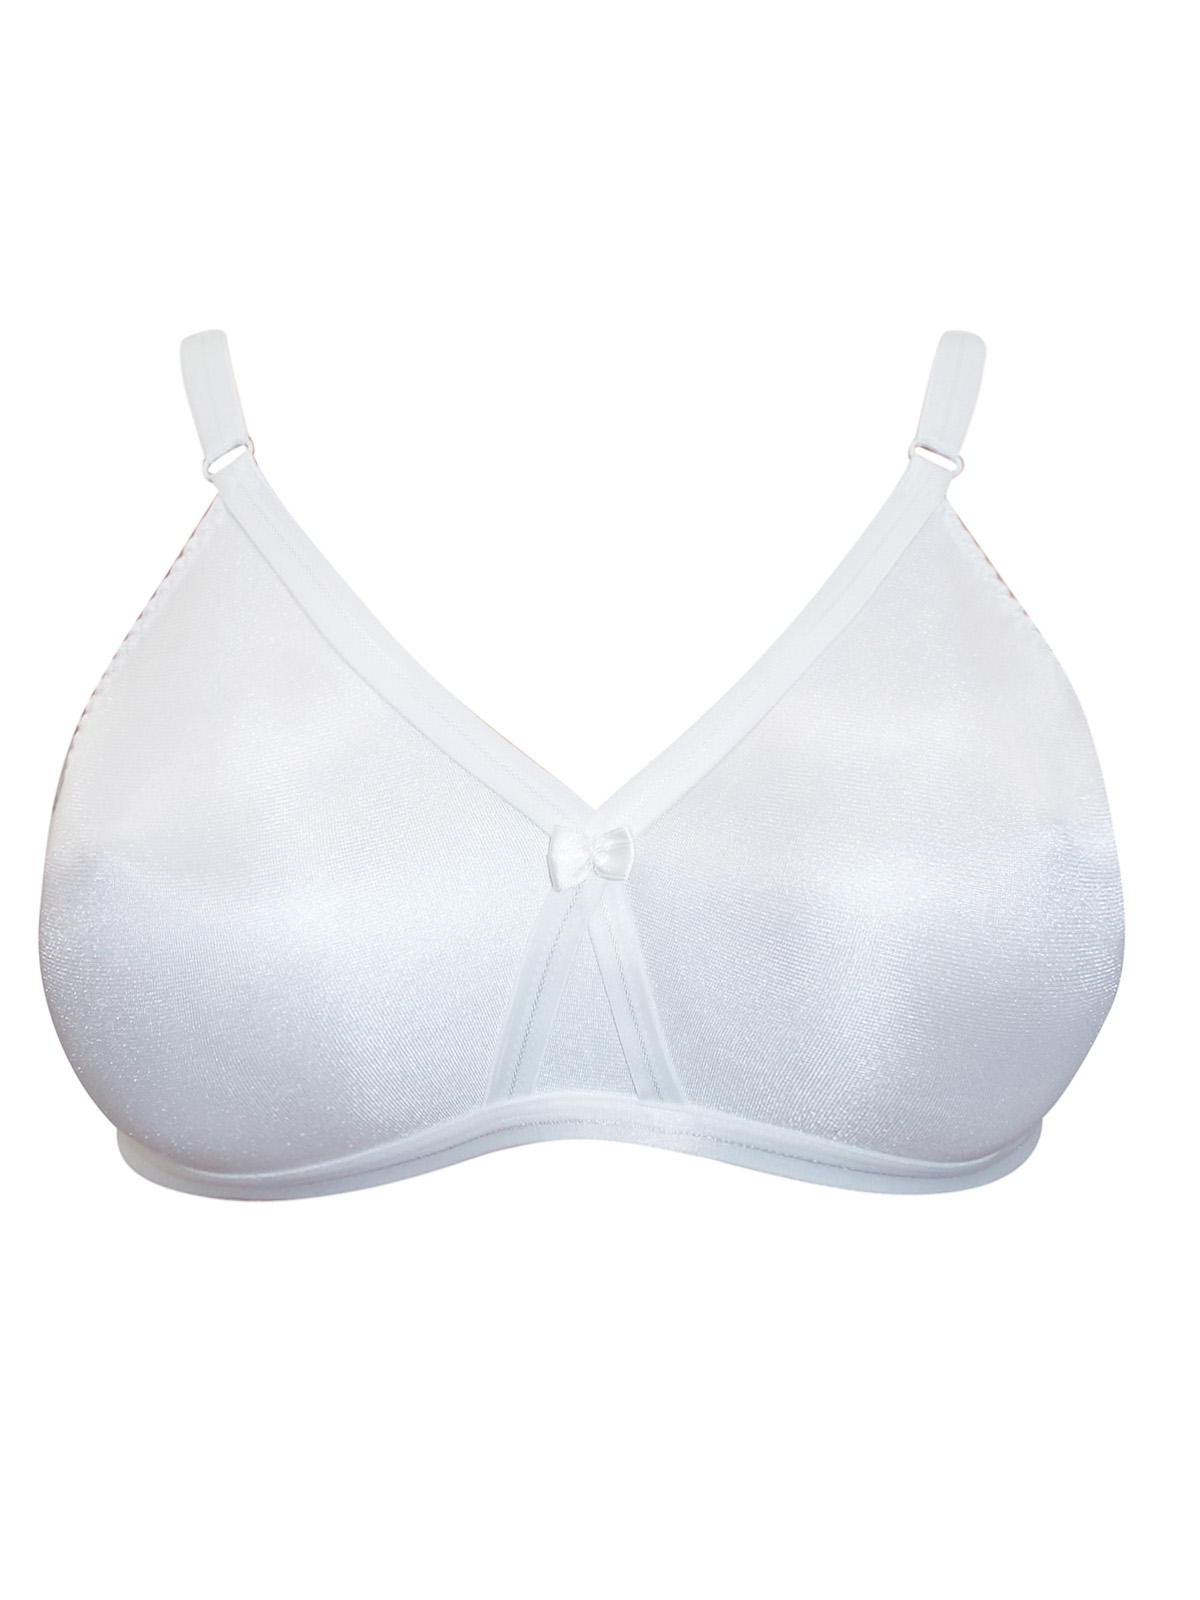 Trofe - - Trofé WHITE Crossover Non-Wired Full Cup Bra - Size 34 to 40  (B-C-D)